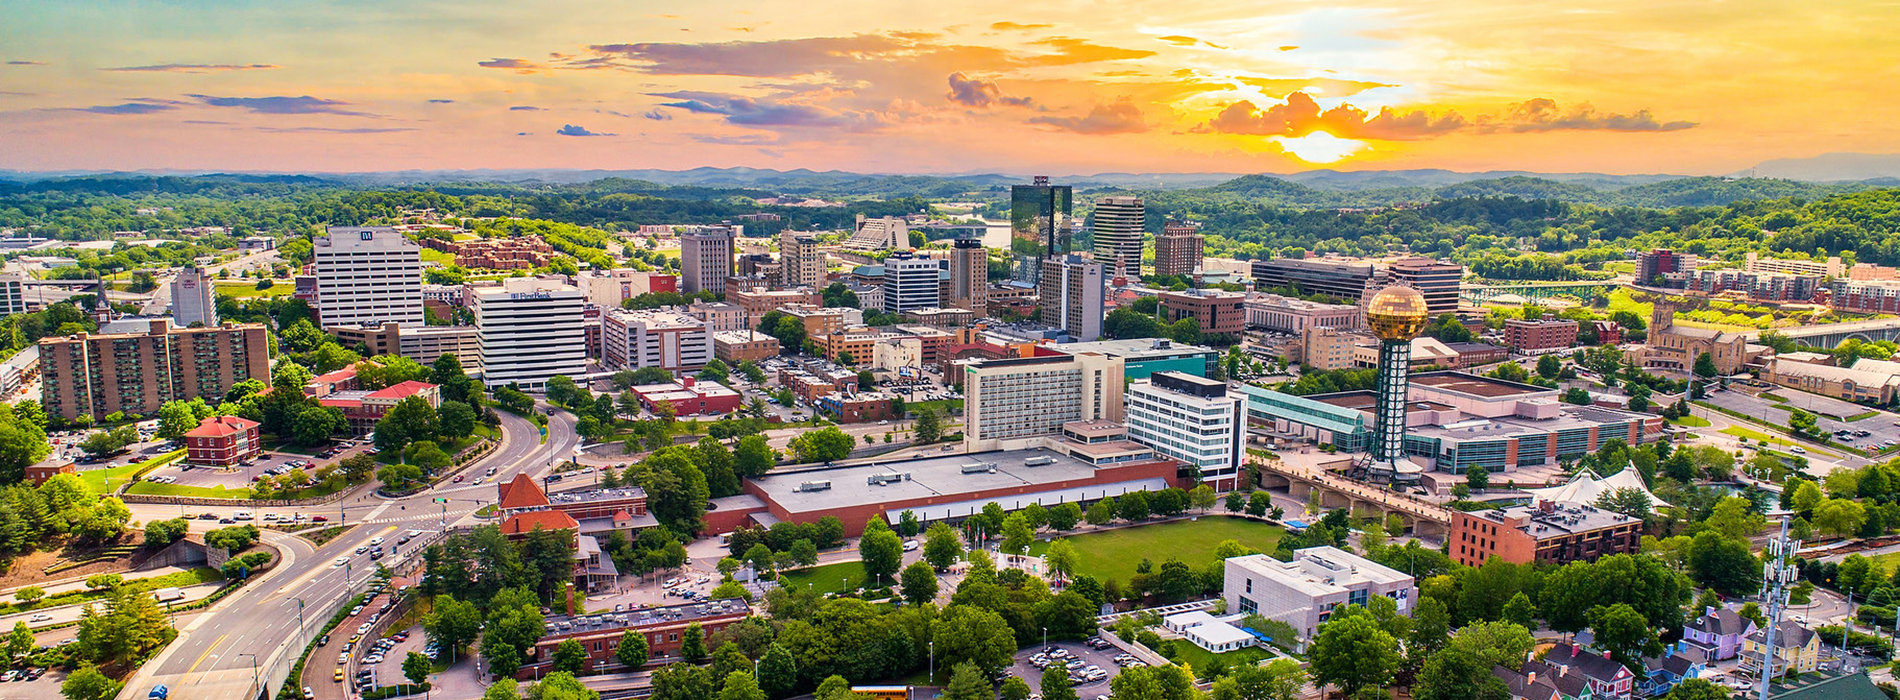 Aerial view of downtown Knoxville TN